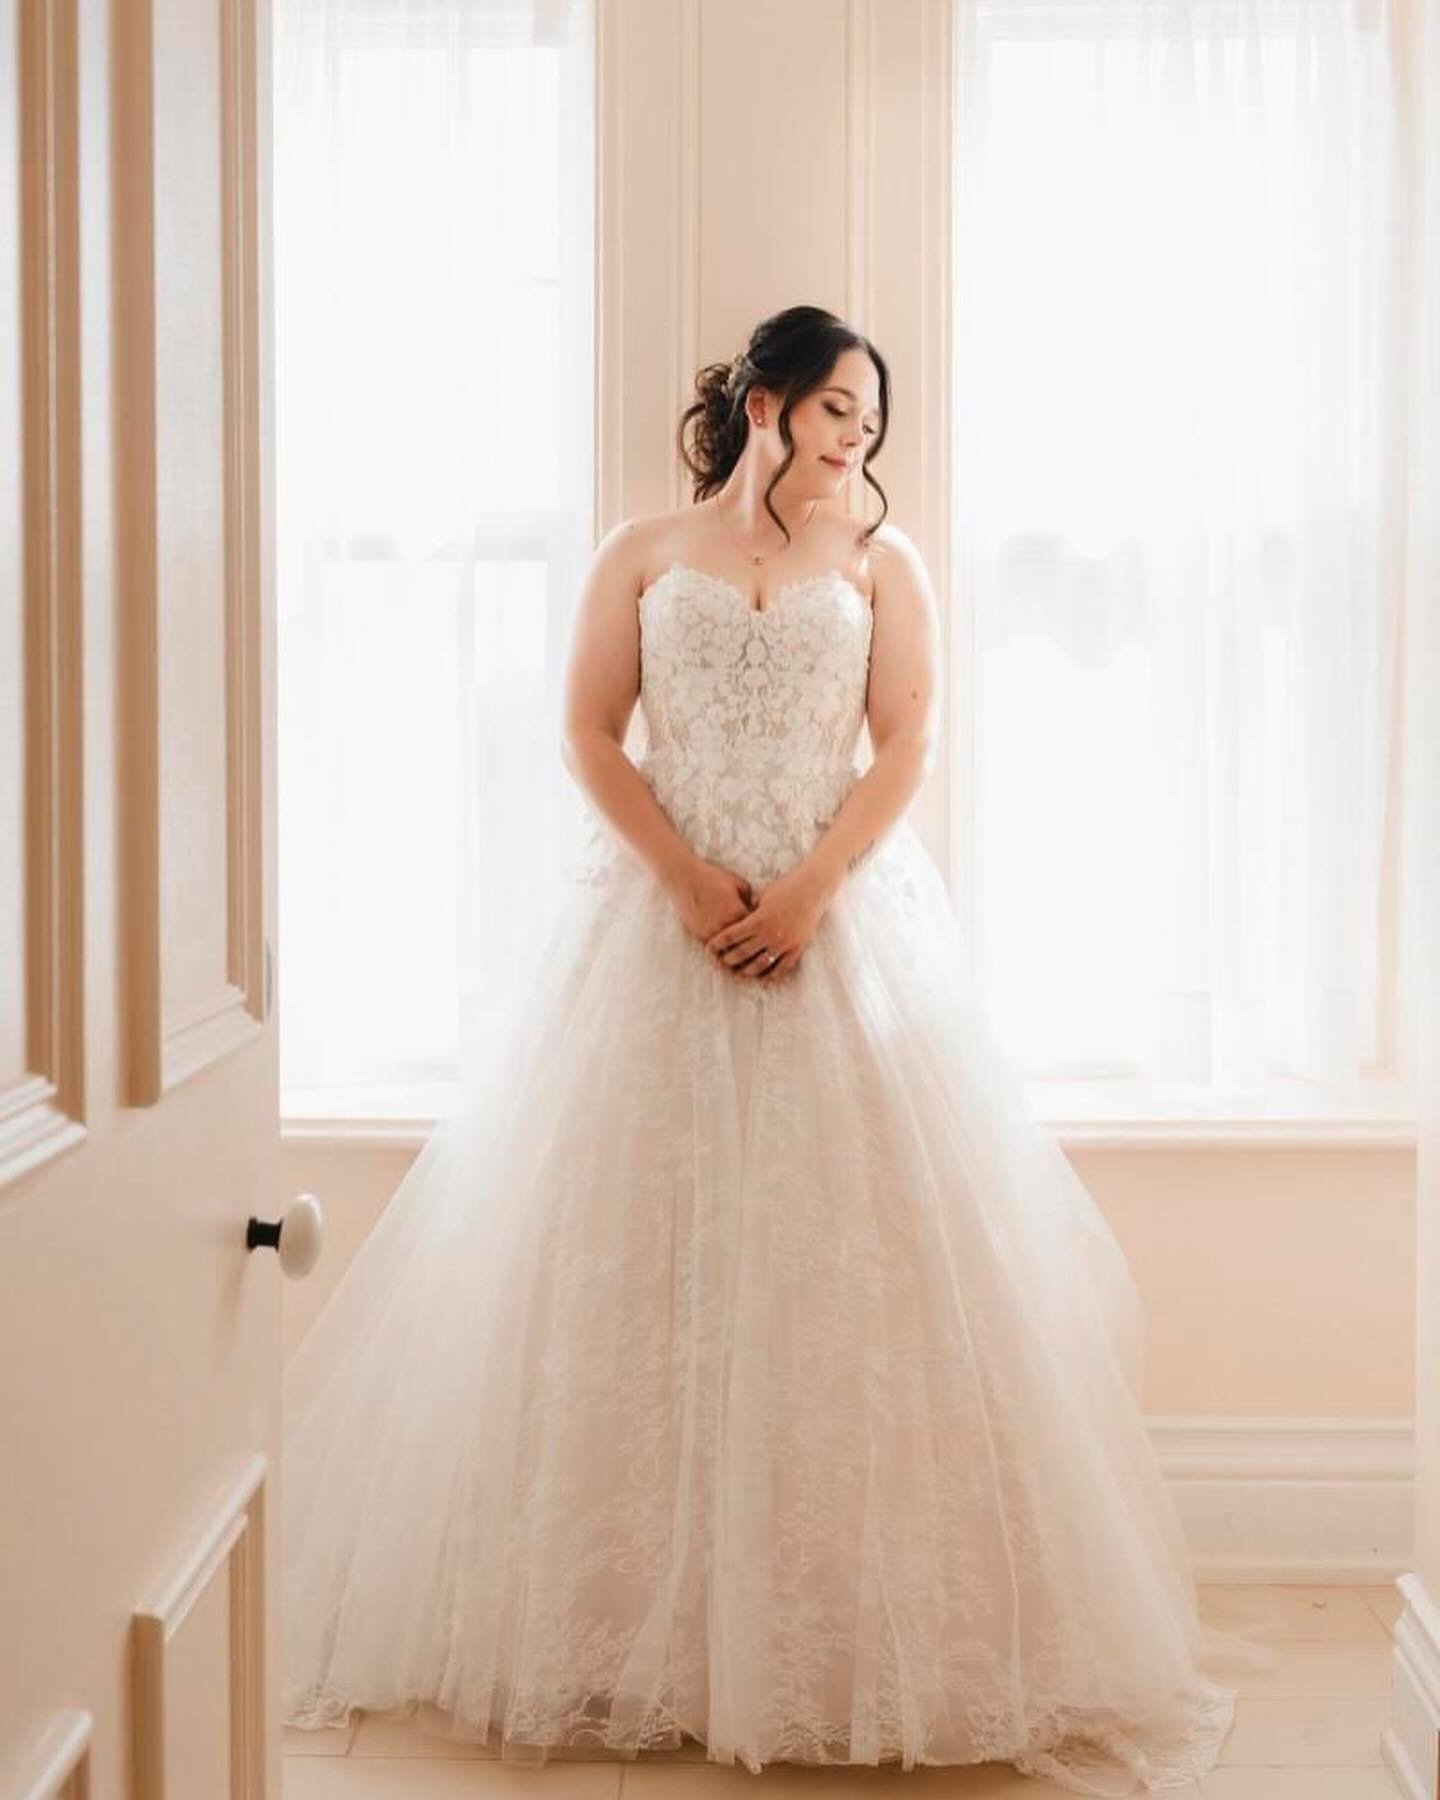 &ldquo;I just wanted to thank you again for such an incredible experience! You made dress shopping so fun and&nbsp;easy and I walked out with confidence that I had found the perfect dress for me!&rdquo;

All eyes on Real Bride Stephanie in her GORGEO